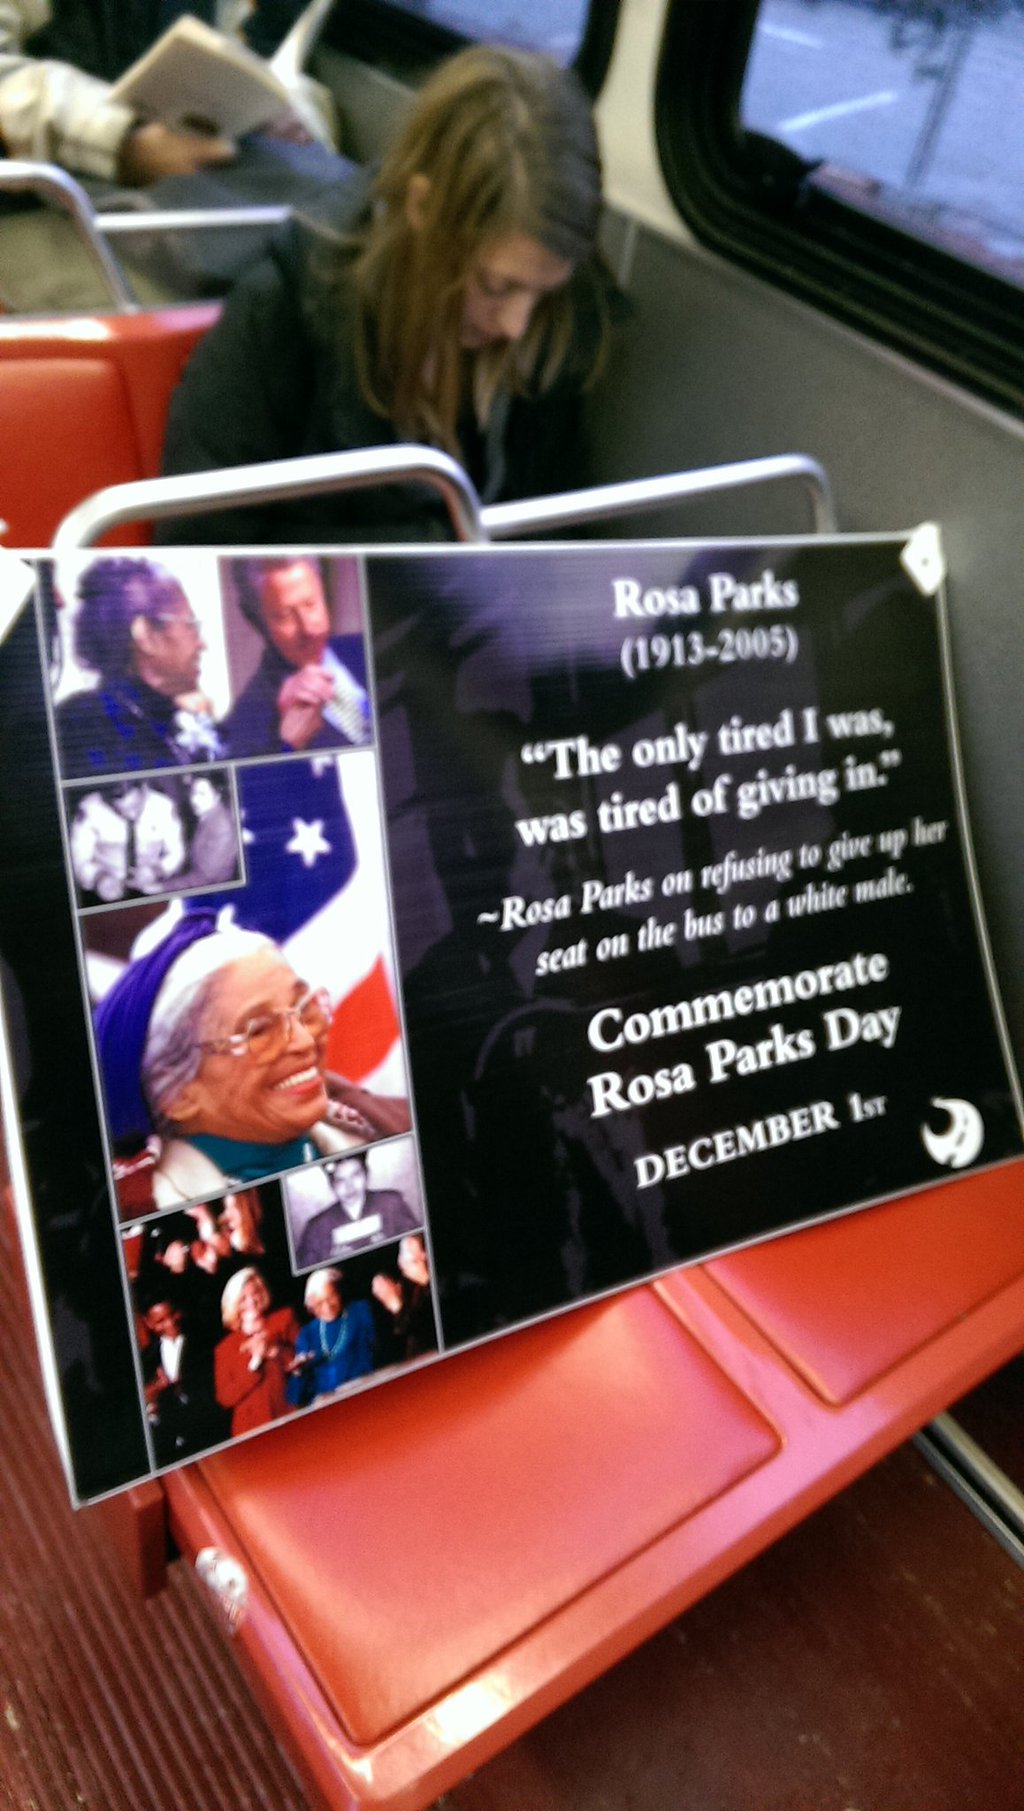 "rosa parks" thesis example    phd dissertations.com